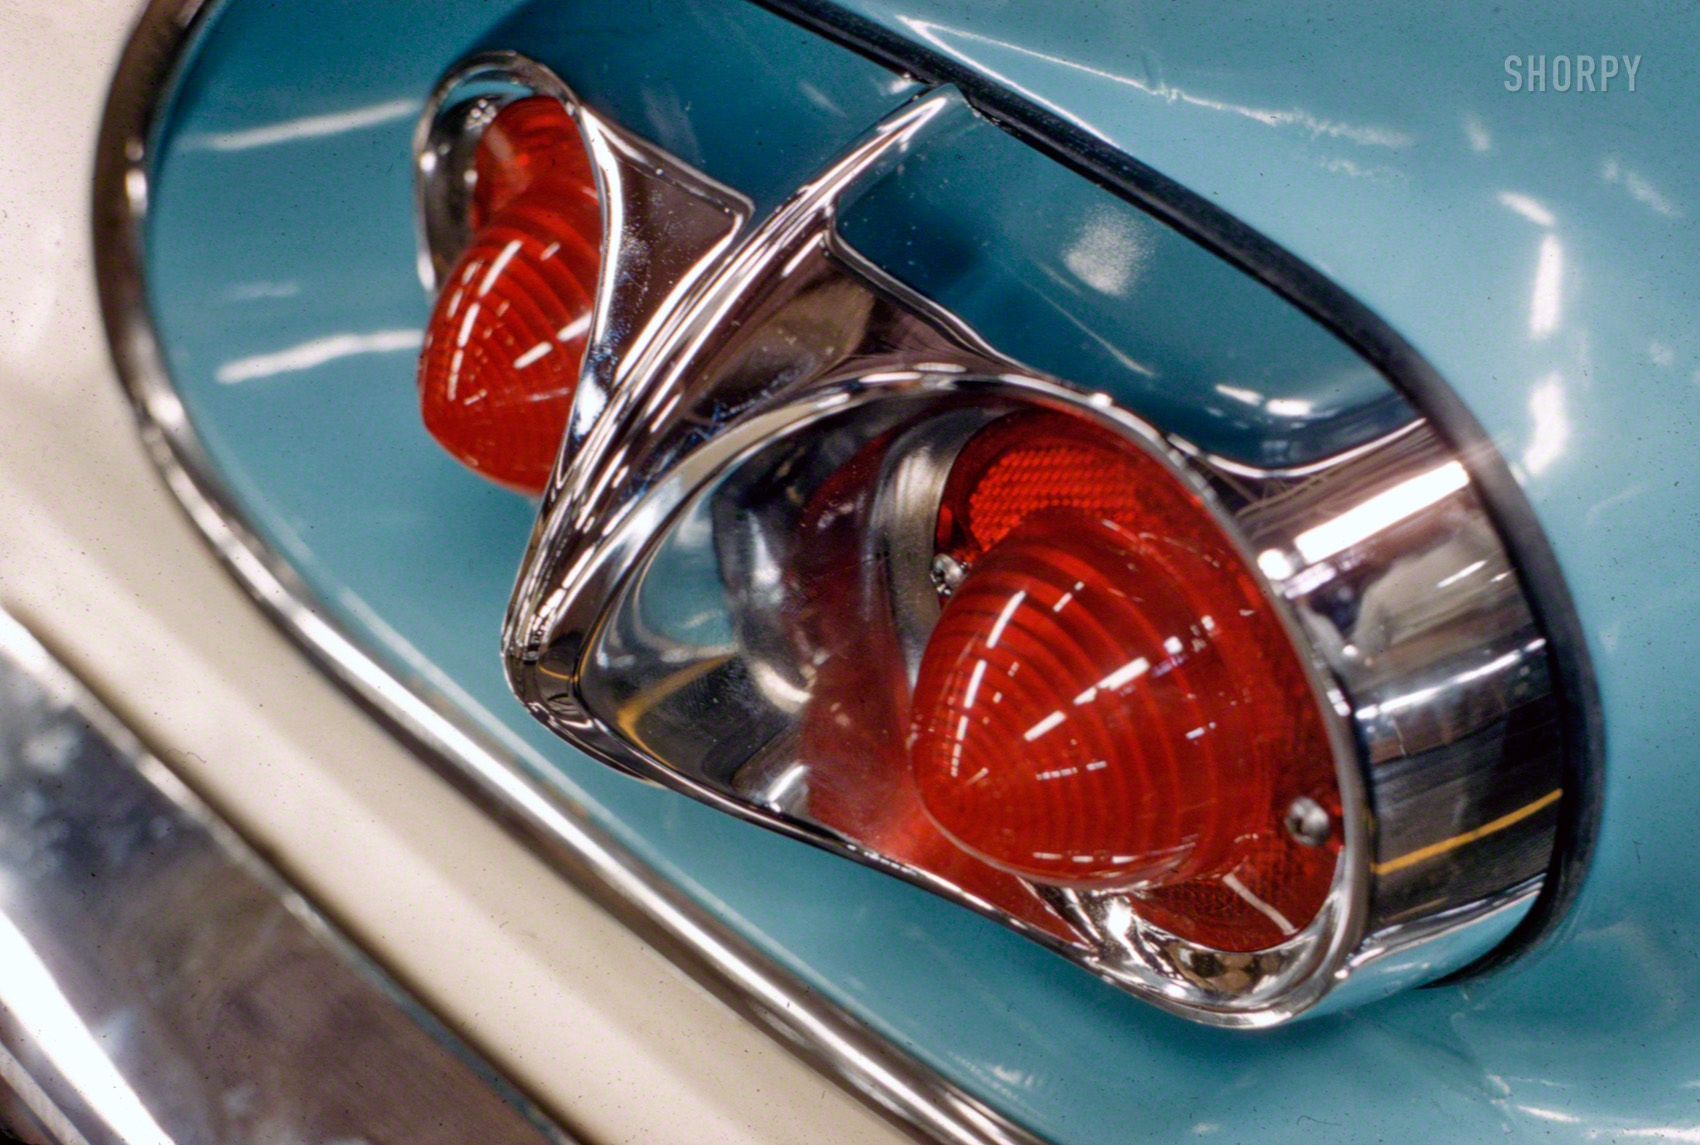 October 1957. "Taillight of 1958 Chevrolet." One of the lower-end Chevys, which had duplex taillights, as opposed to the triple-light tail-plus-backup arrangement on the deluxe models. Photo by Phillip Harrington for the Look magazine assignment "GM's 50 Years of Men, Money and Motors." View full size.